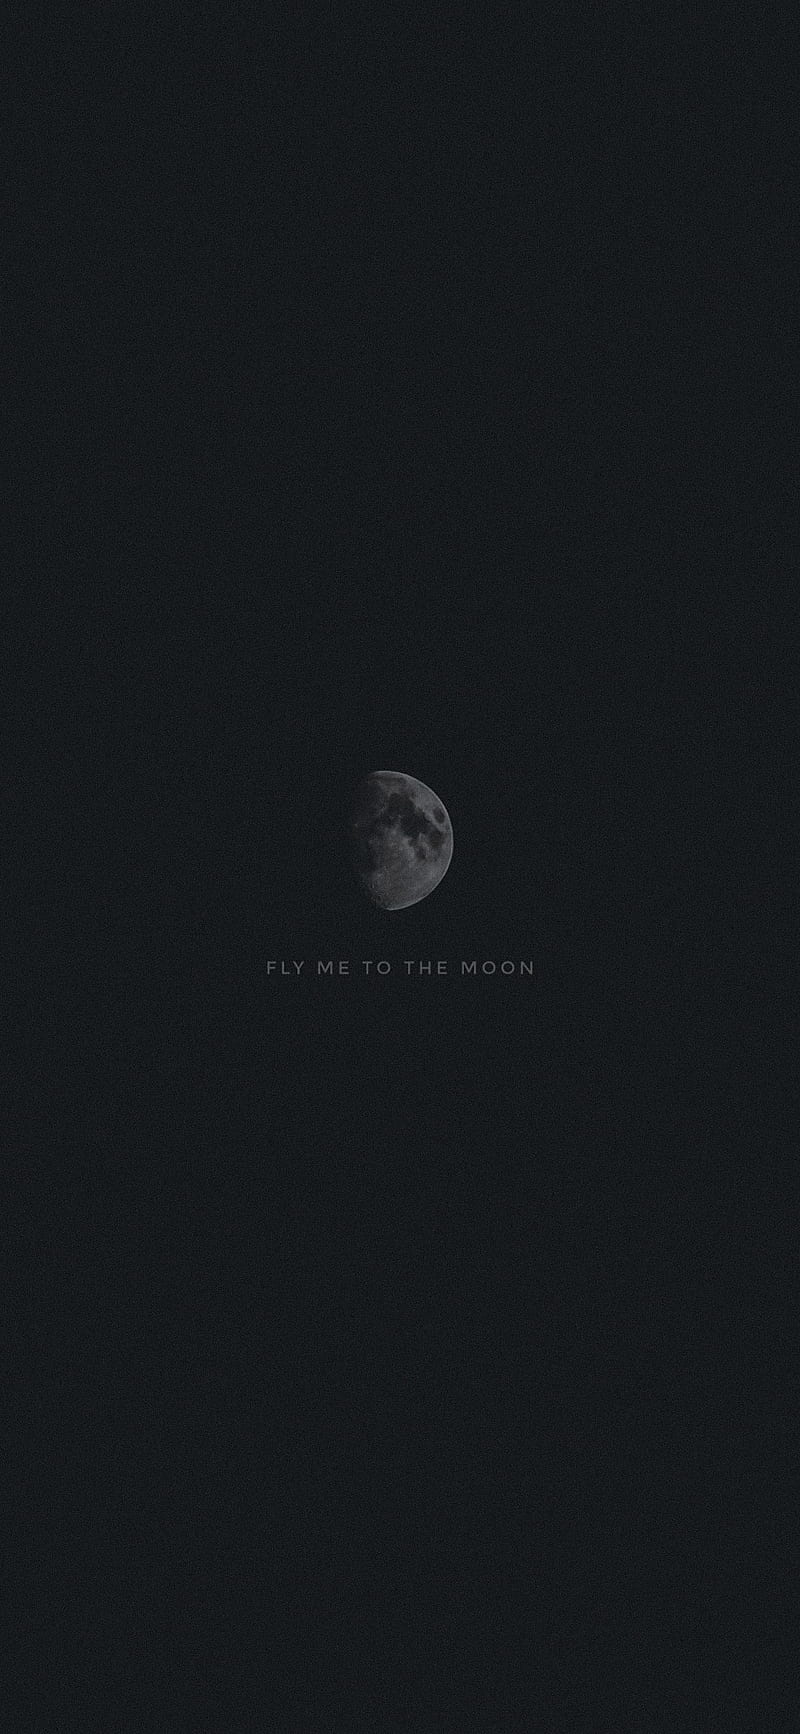 Fly me to the moon wallpaper - Moon, galaxy